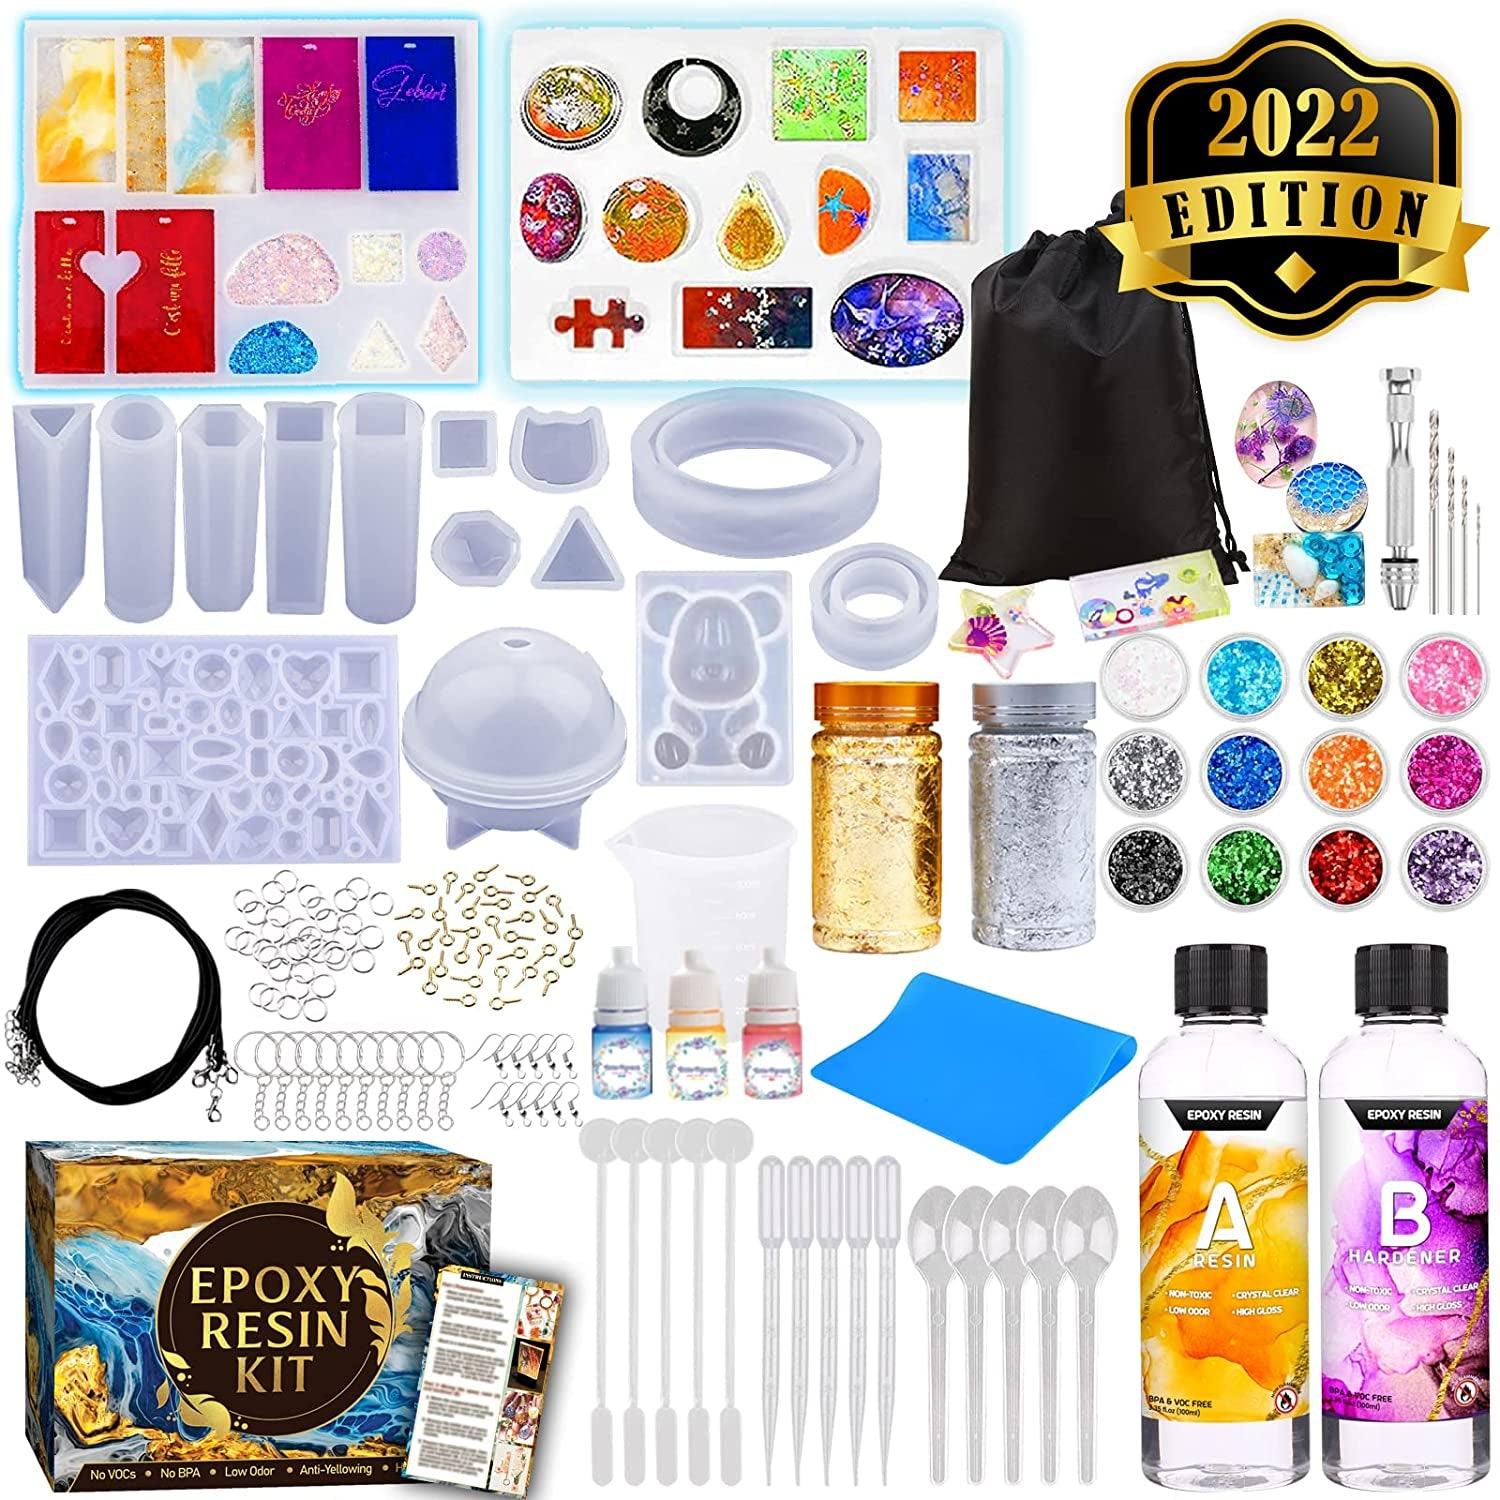 Epoxy Resin Silicone Molds Starter Kit All in One Home Decor Art Clear Craft Kit Storage Bag Spoons Gold Foil Flakes - WoodArtSupply